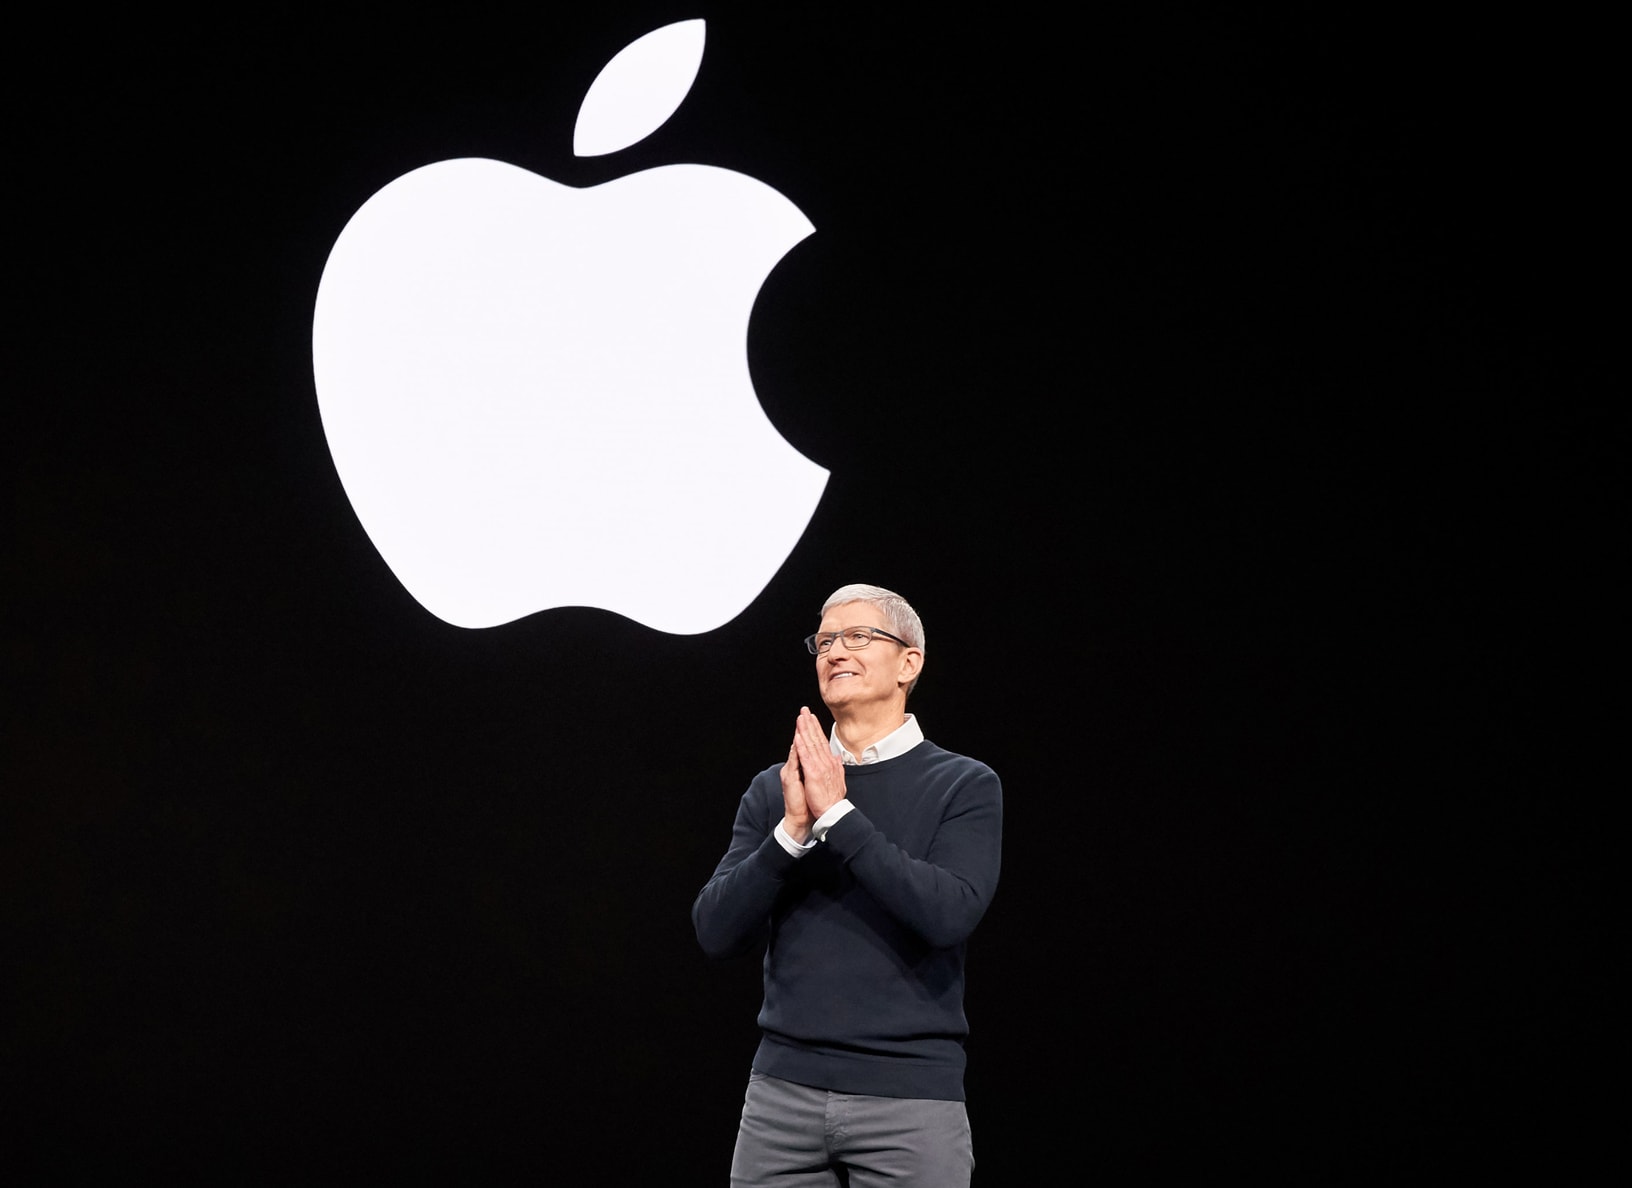 Interviews: Tim Cook Talks About Apple's “Uptime” Feature and Acquisitions